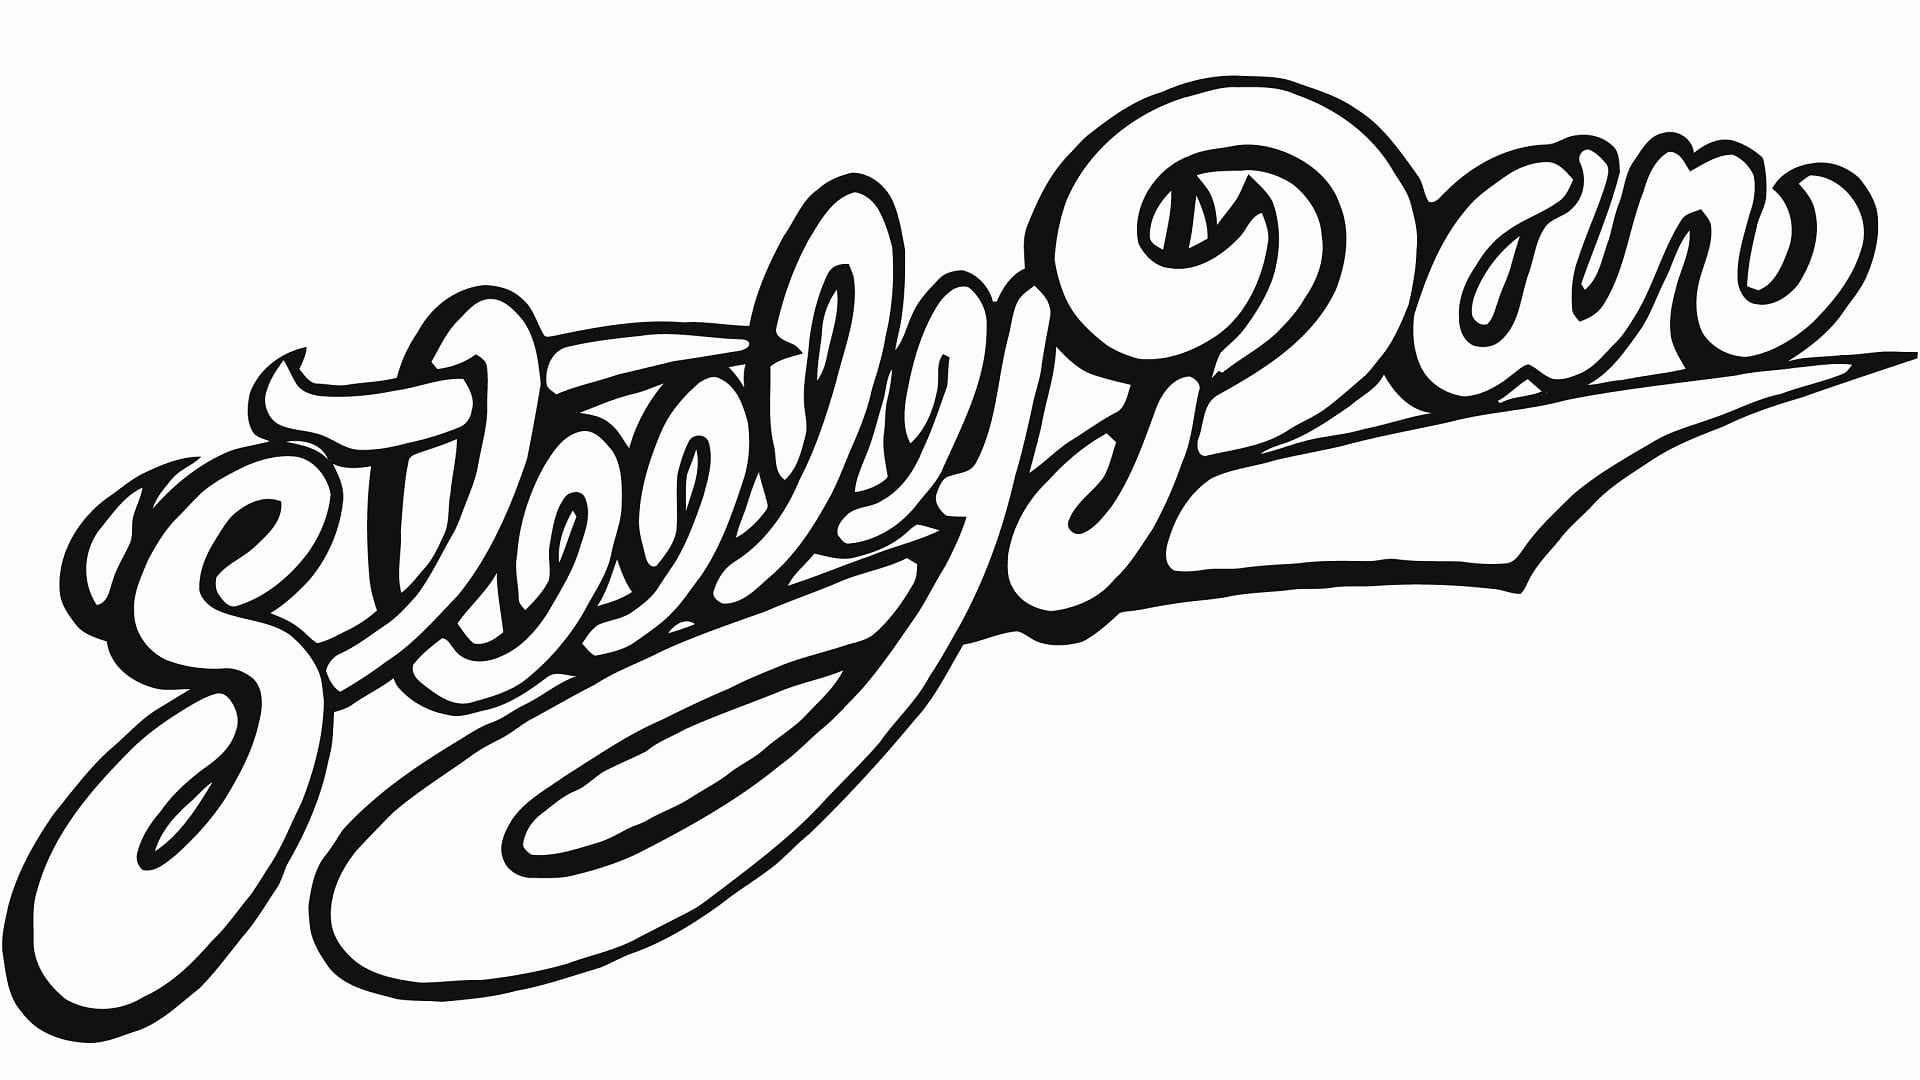 steely dan calligraphy, name, graphics, font, letters, vector